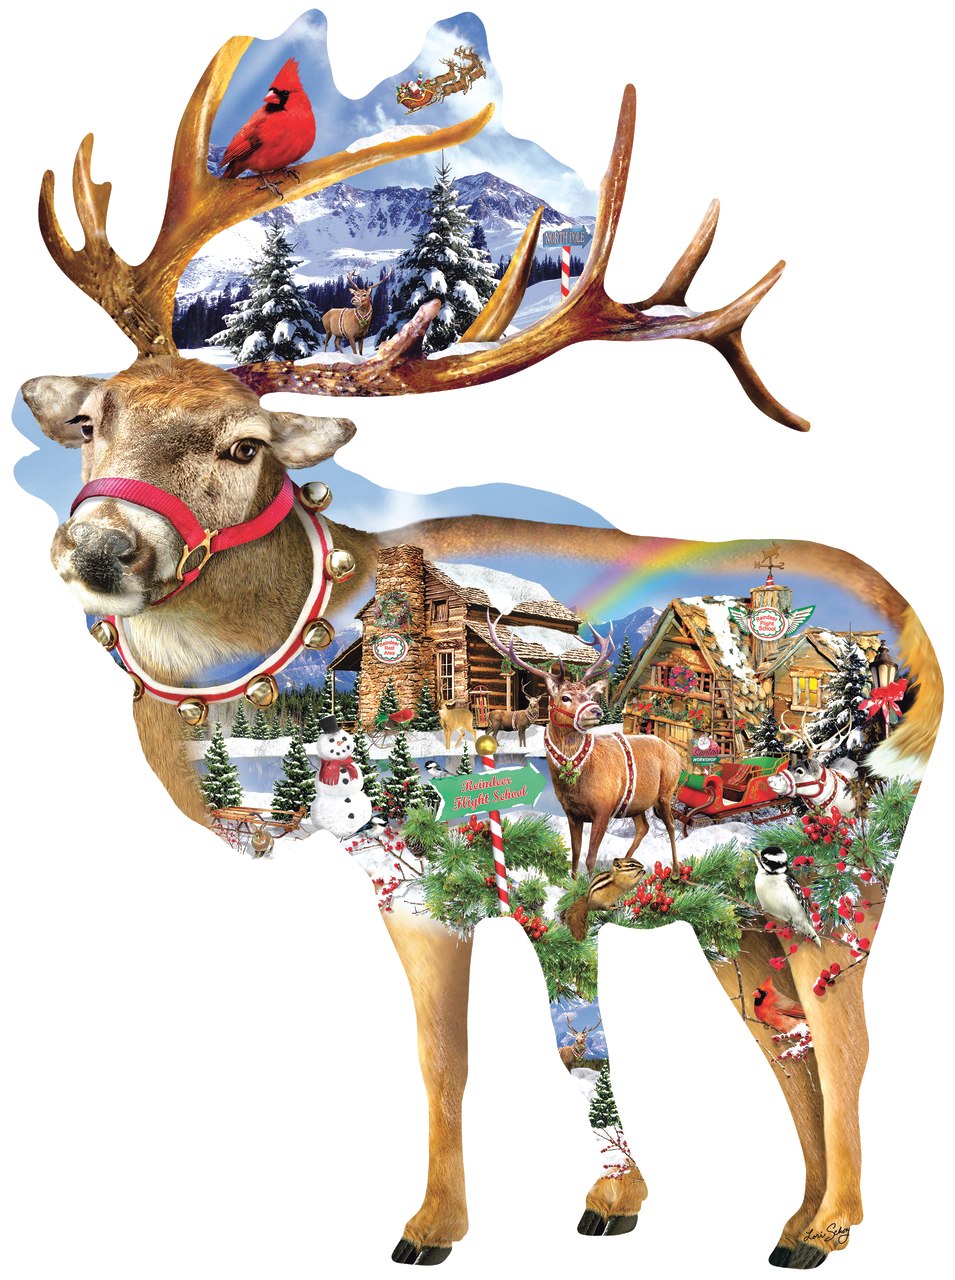 Reindeer Training - 800pc Jigsaw Puzzle by Sunsout  			  					NEW